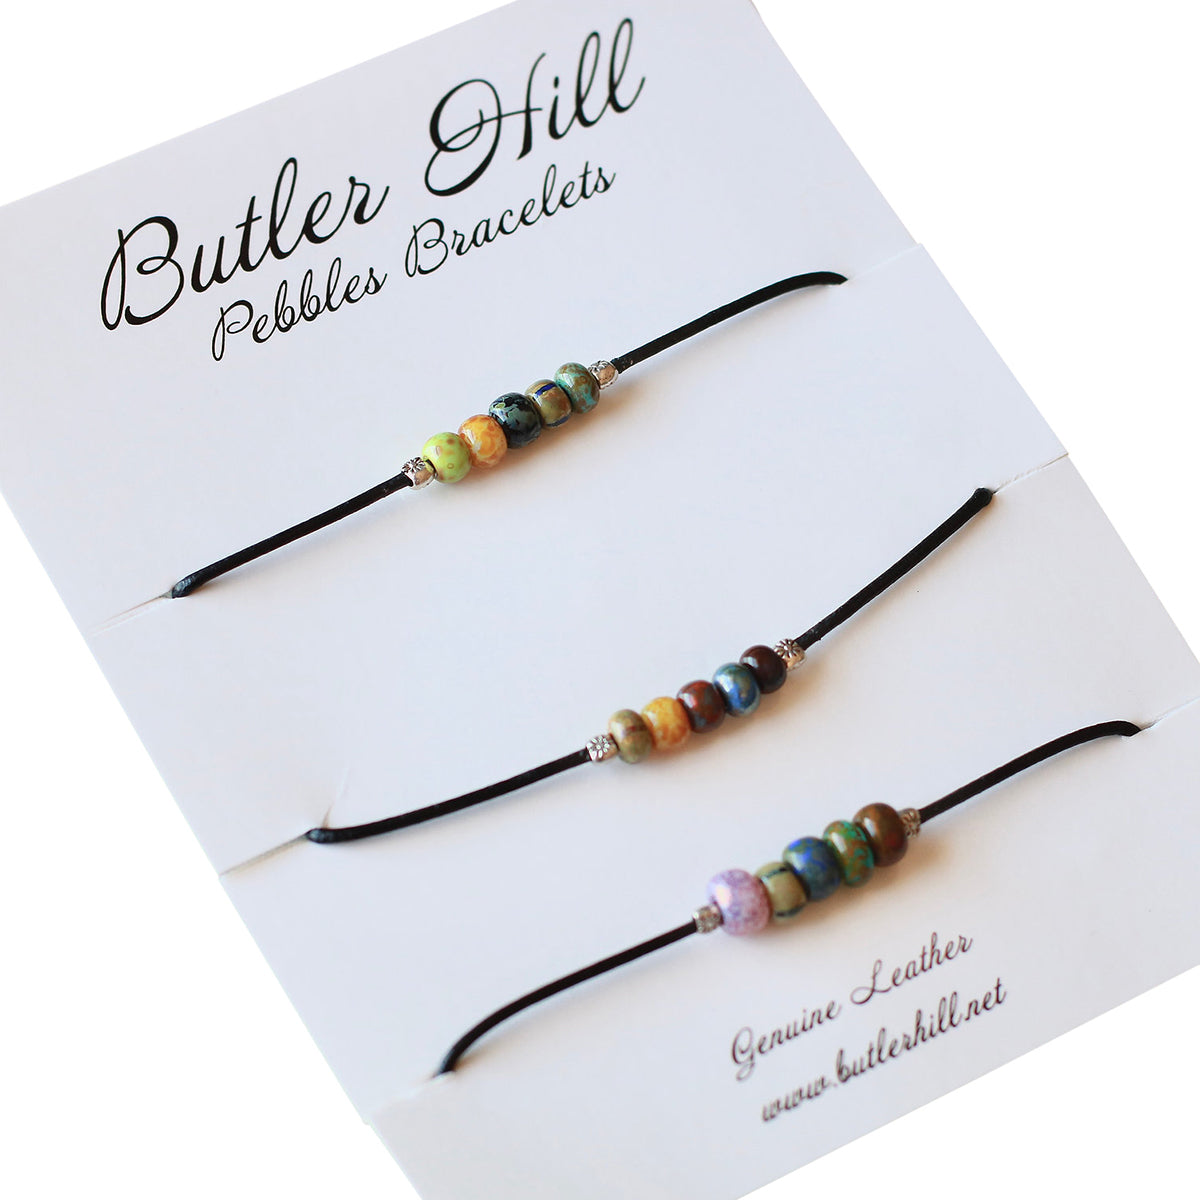 Three Butler Hill Pebble Bracelet Packs Medium with magnetic clasps are displayed on a white background, showcasing the Butler Hill branding details.